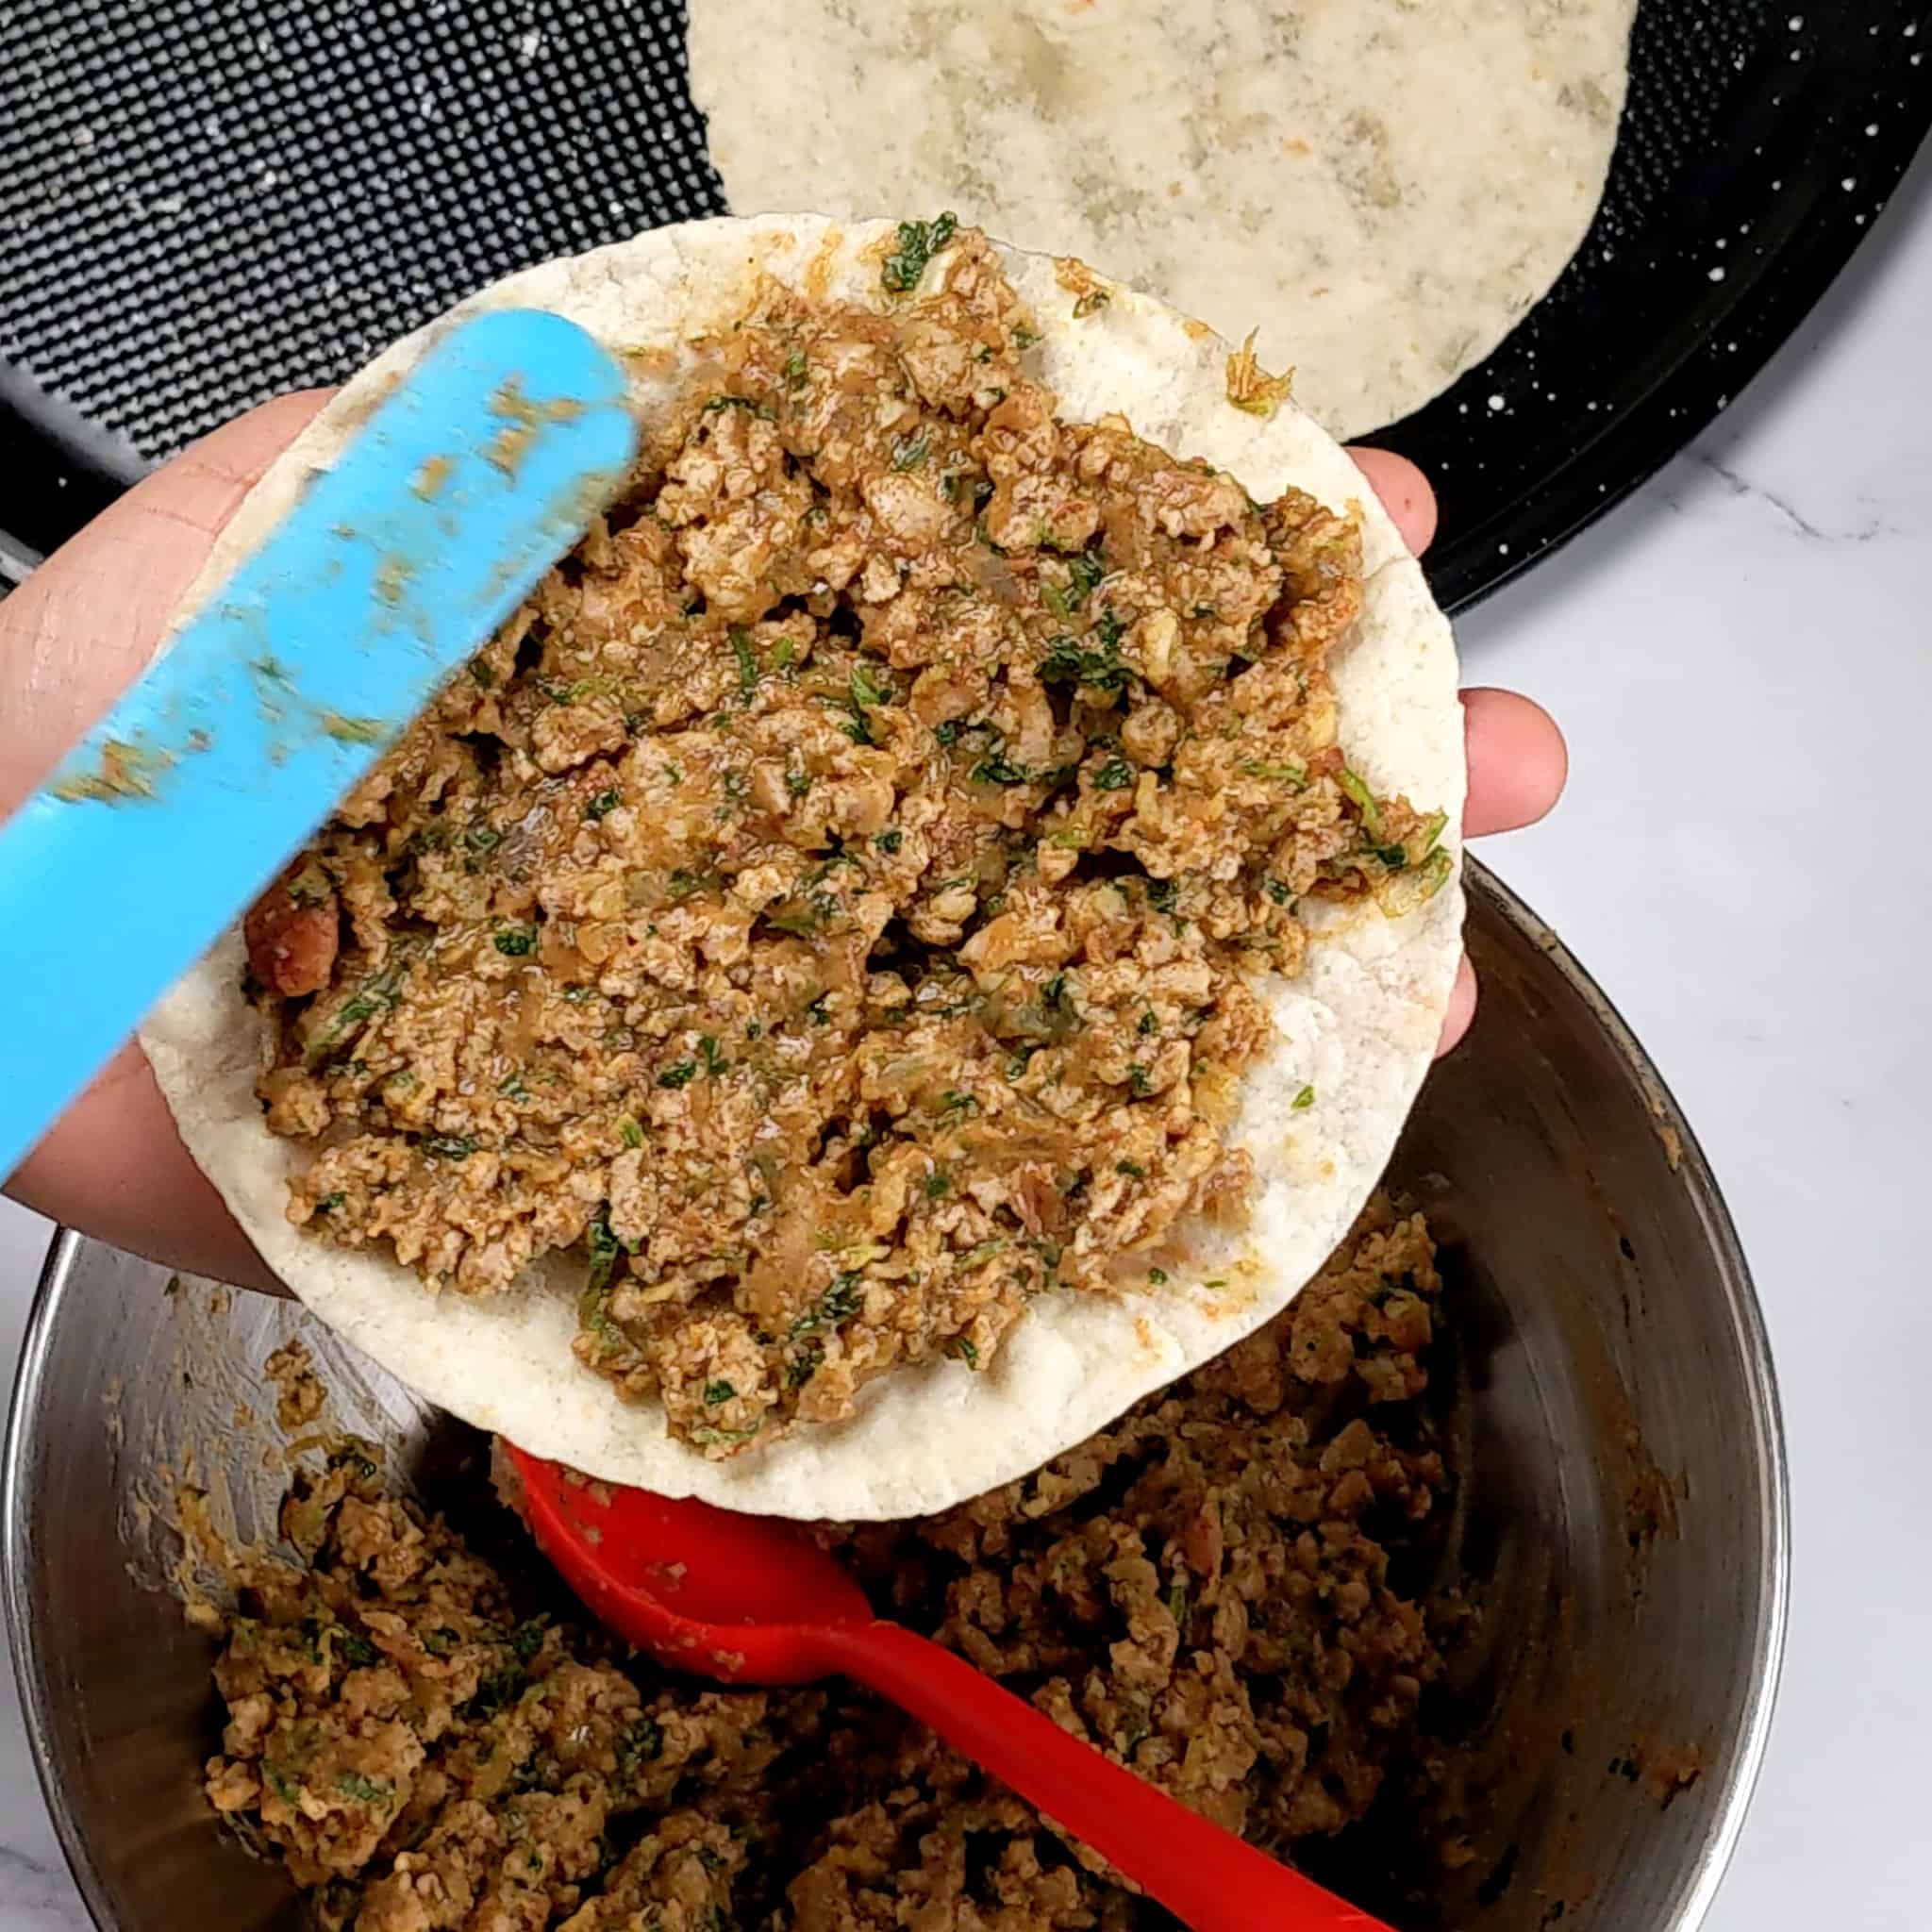 seasoned ground turkey and refried beans mix being spread on a flour tortillas with a long silicone spatula over a bowl of more seasoned meat and a corn tortilla laying in a large pizza pan.